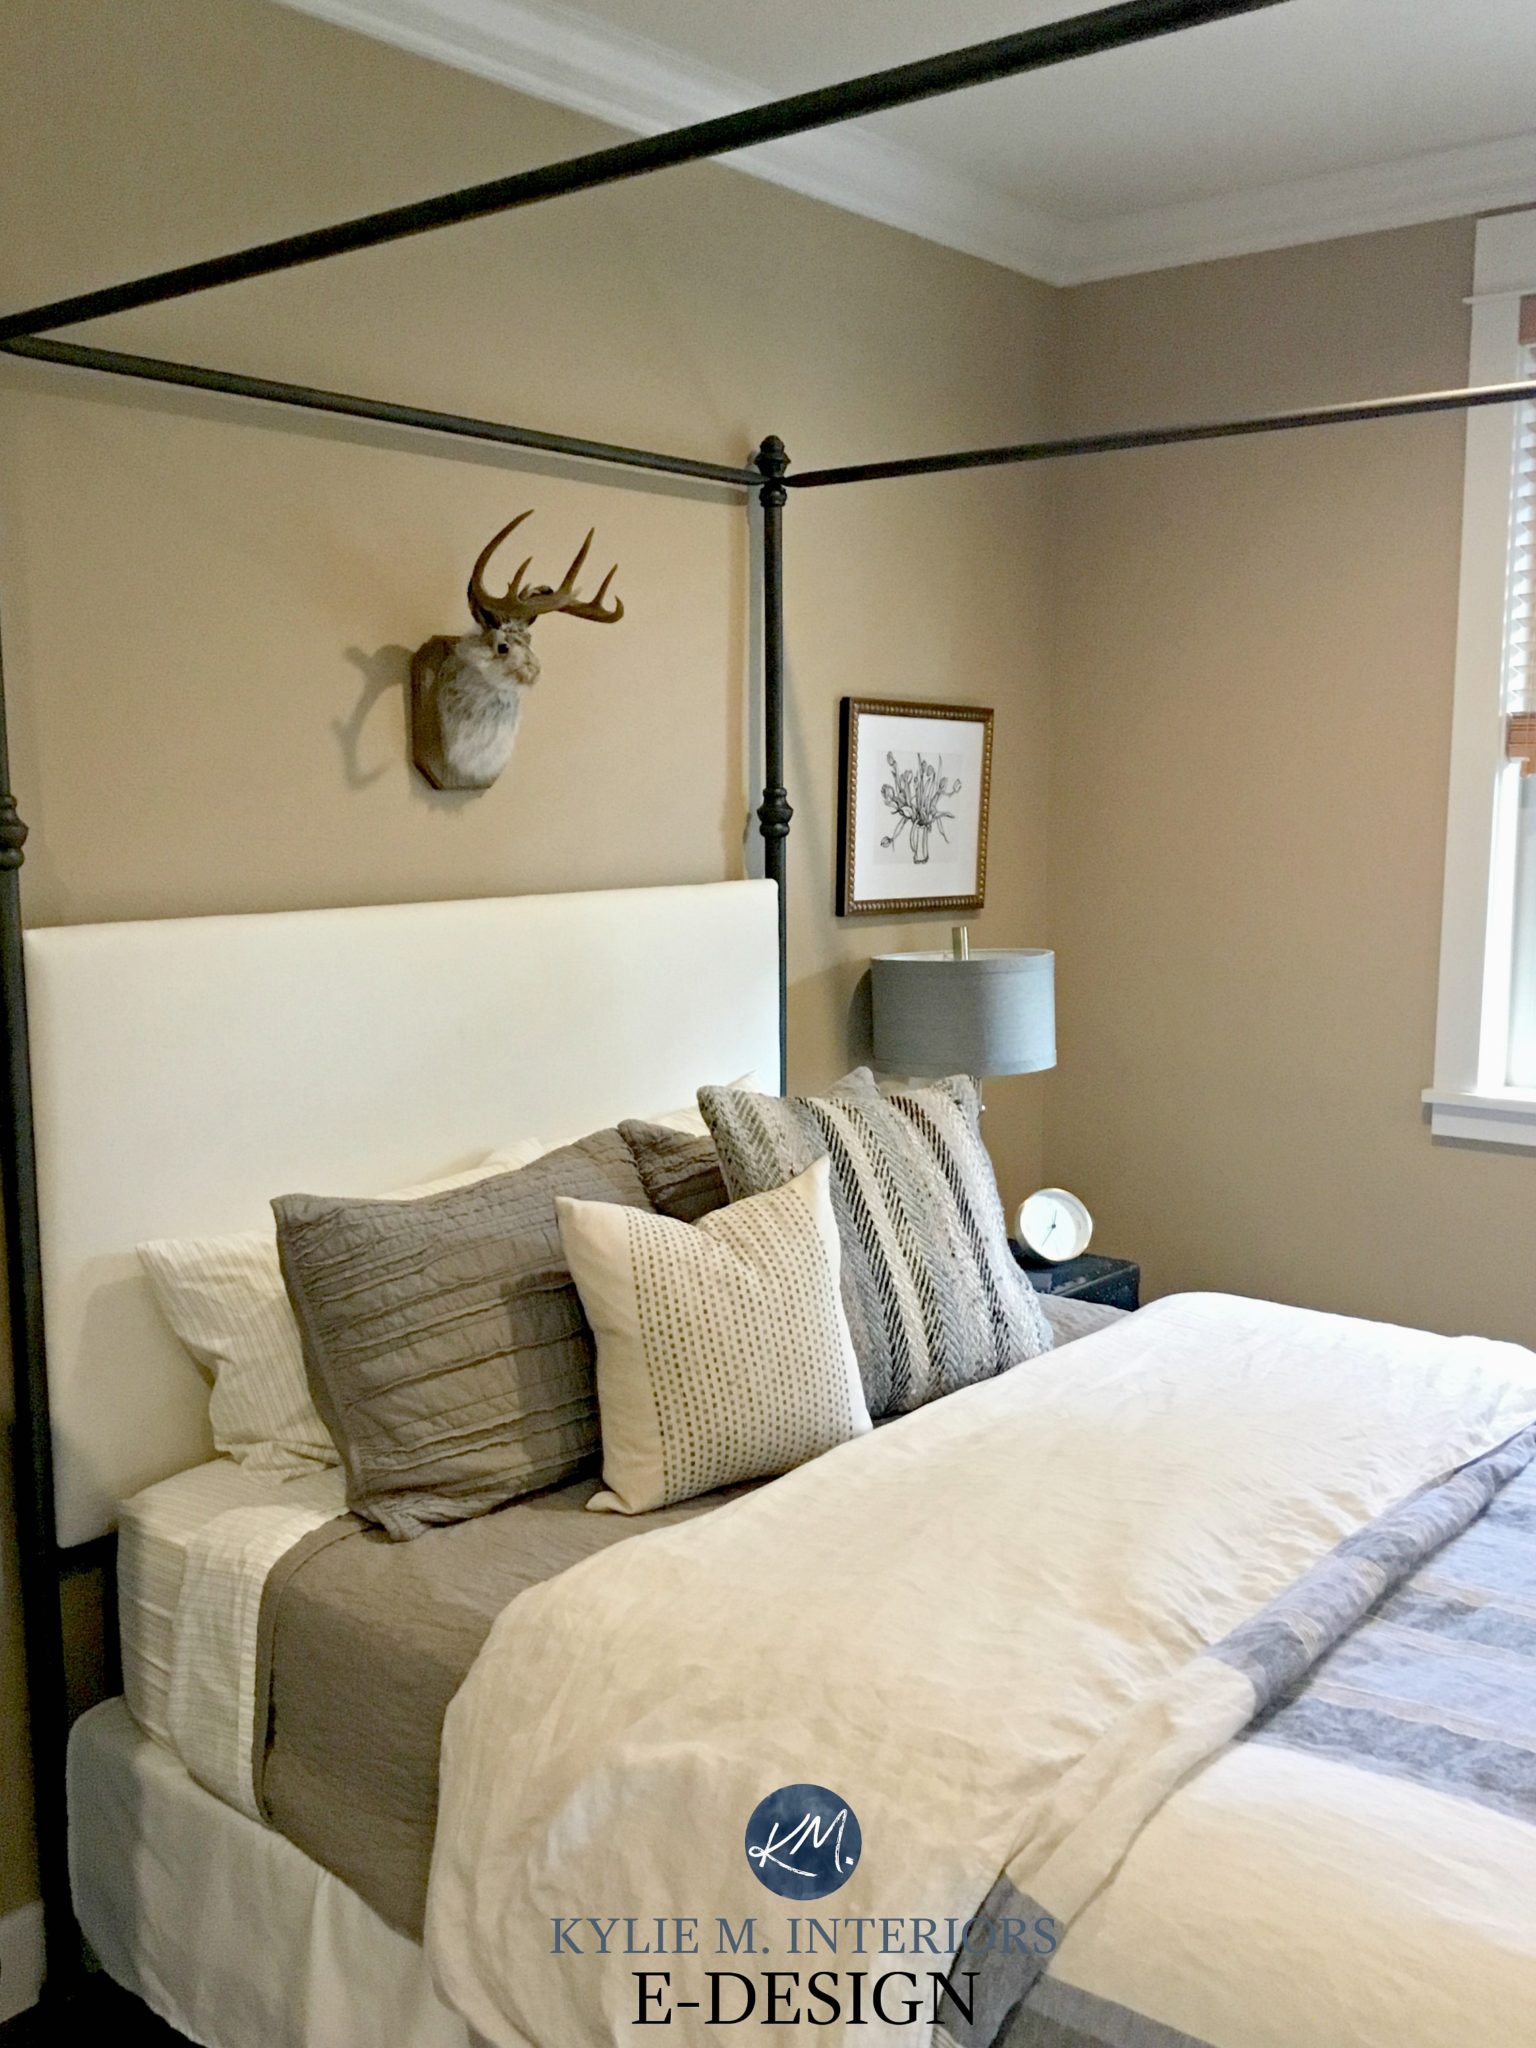 Bedroom Wall Interior Design: Create A Cozy And Inviting Space